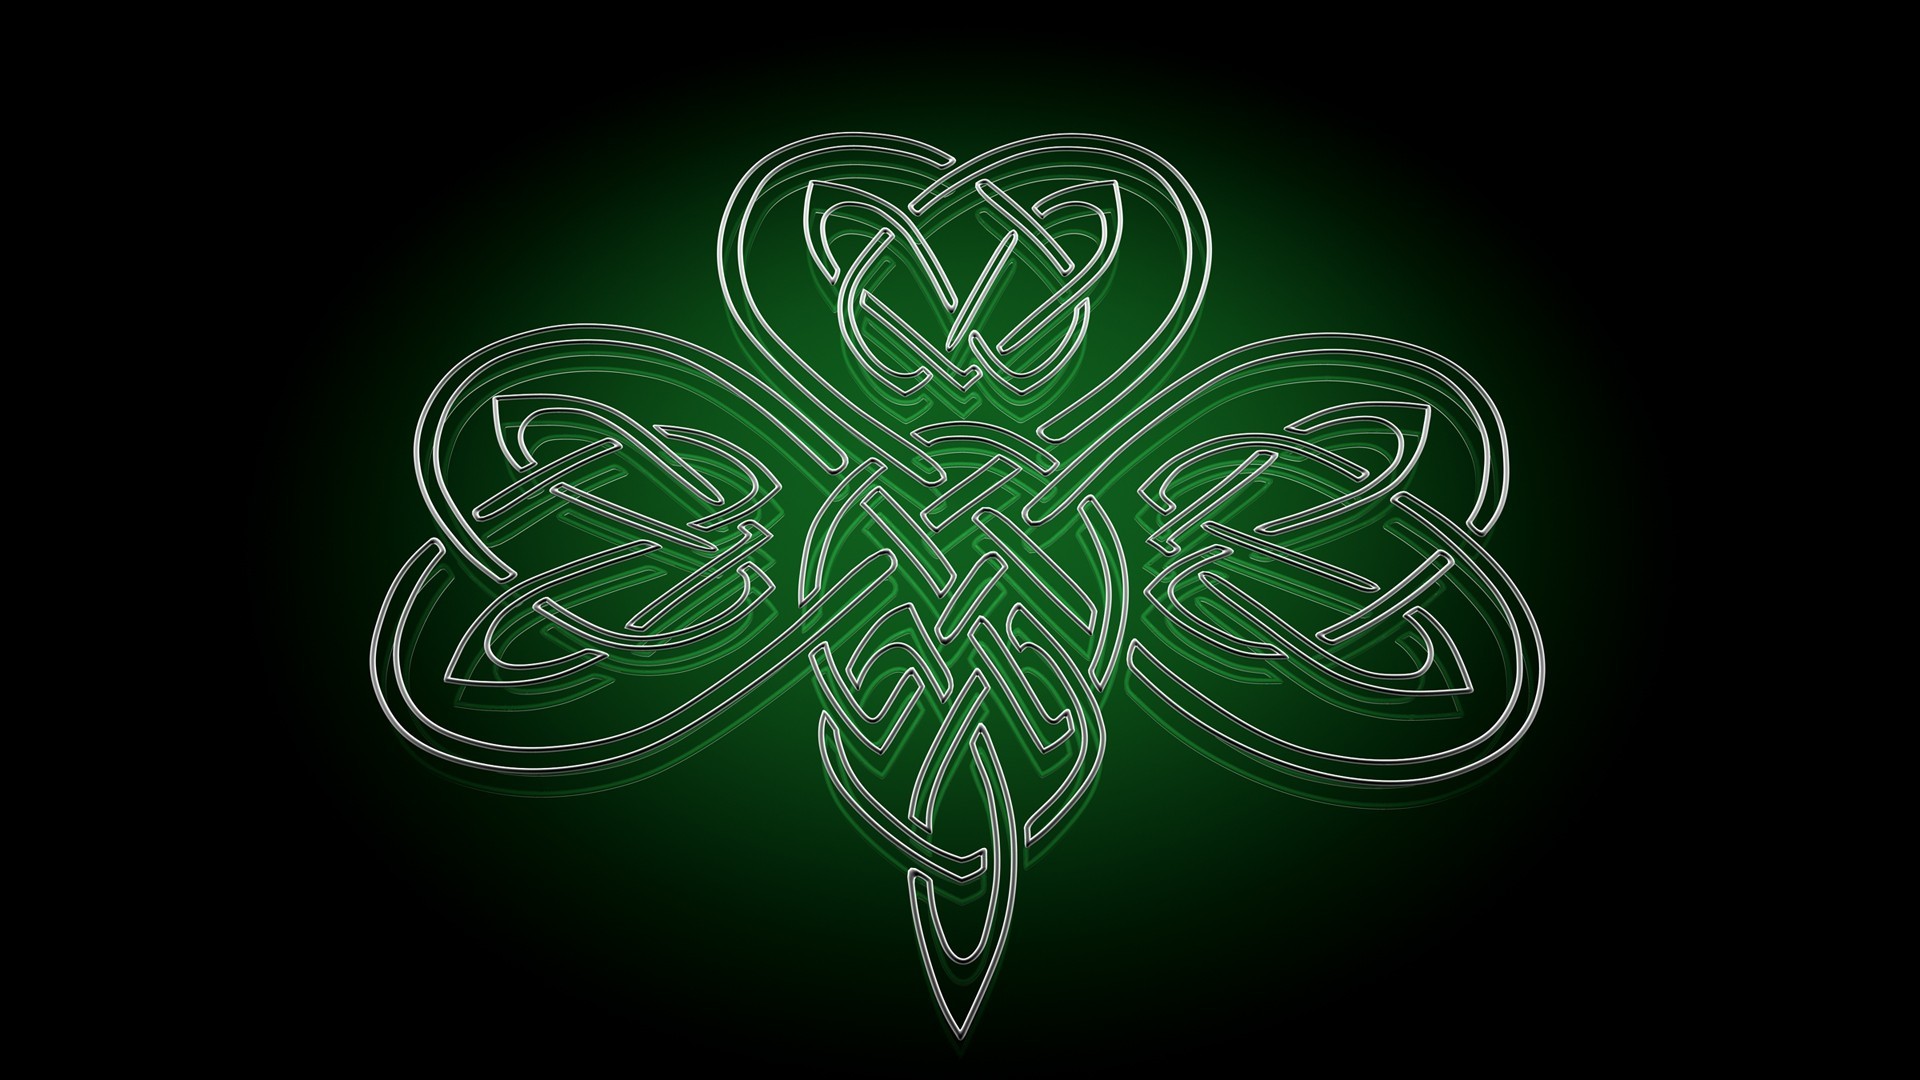 1920x1080  Displaying 18> Images For - Celtic Symbol Wallpaper.